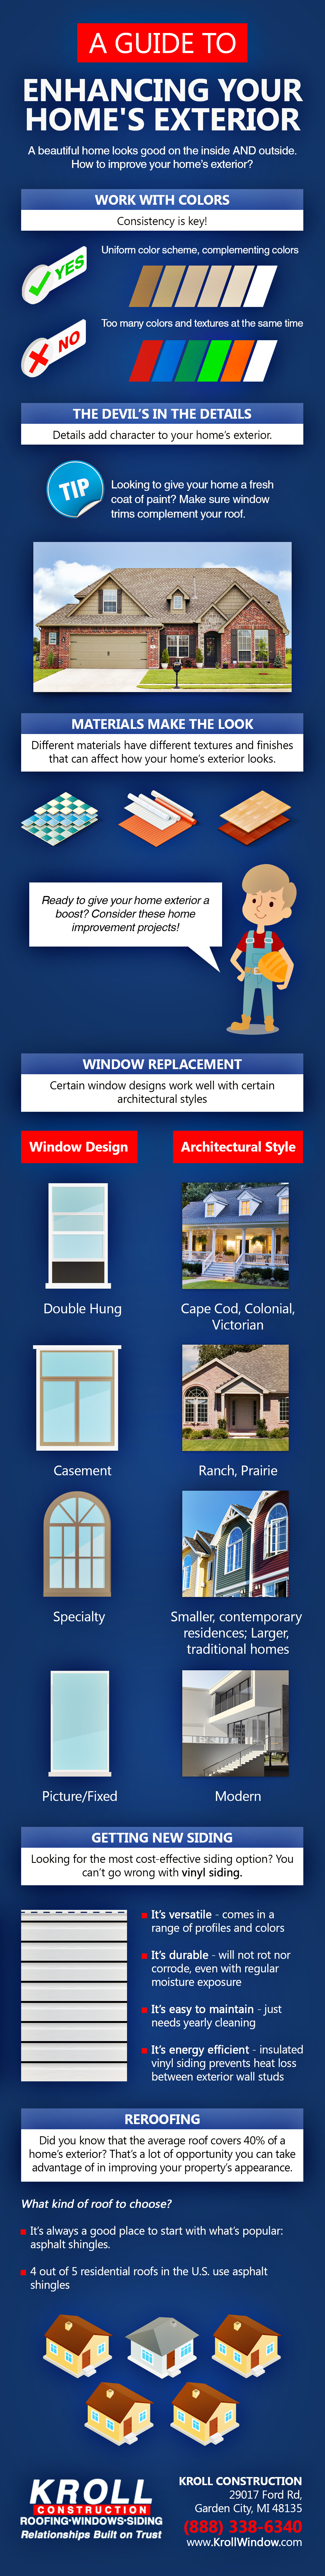 Infographic – A Guide to Enhancing Your Home’s Exterior